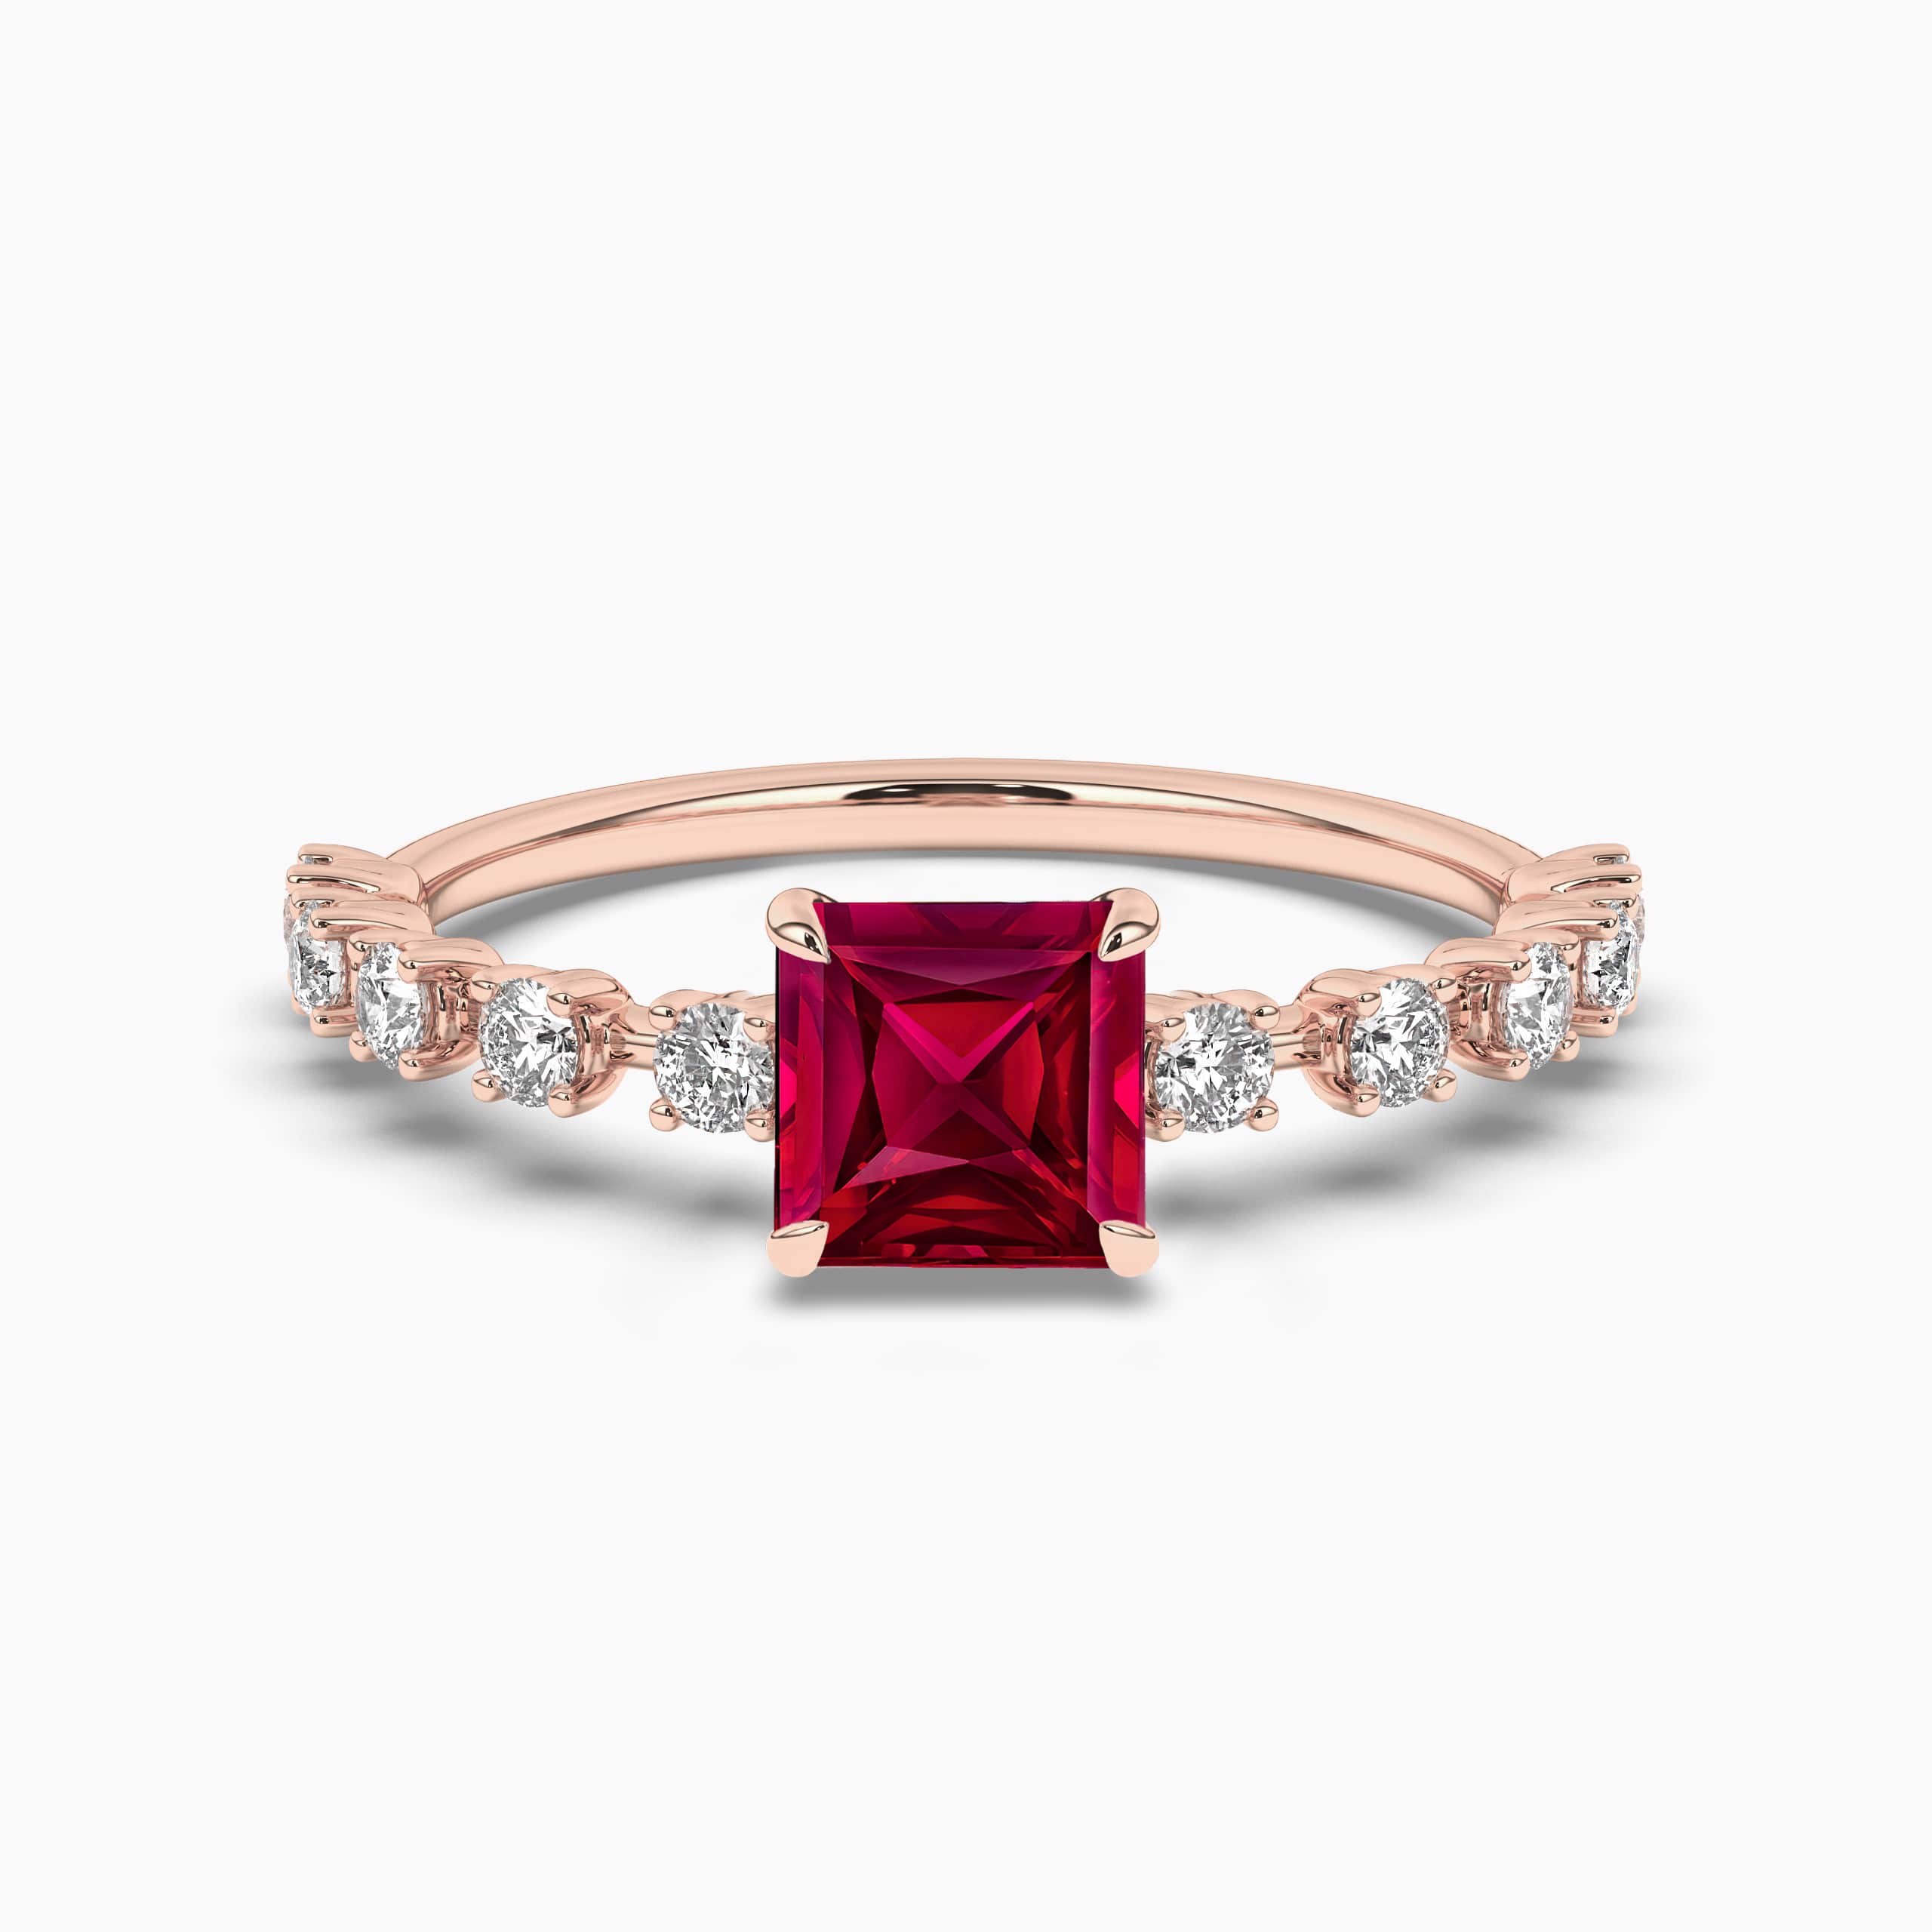 Red Ruby and Diamond Engagement Bridal Wedding Ring Set in Rose Gold